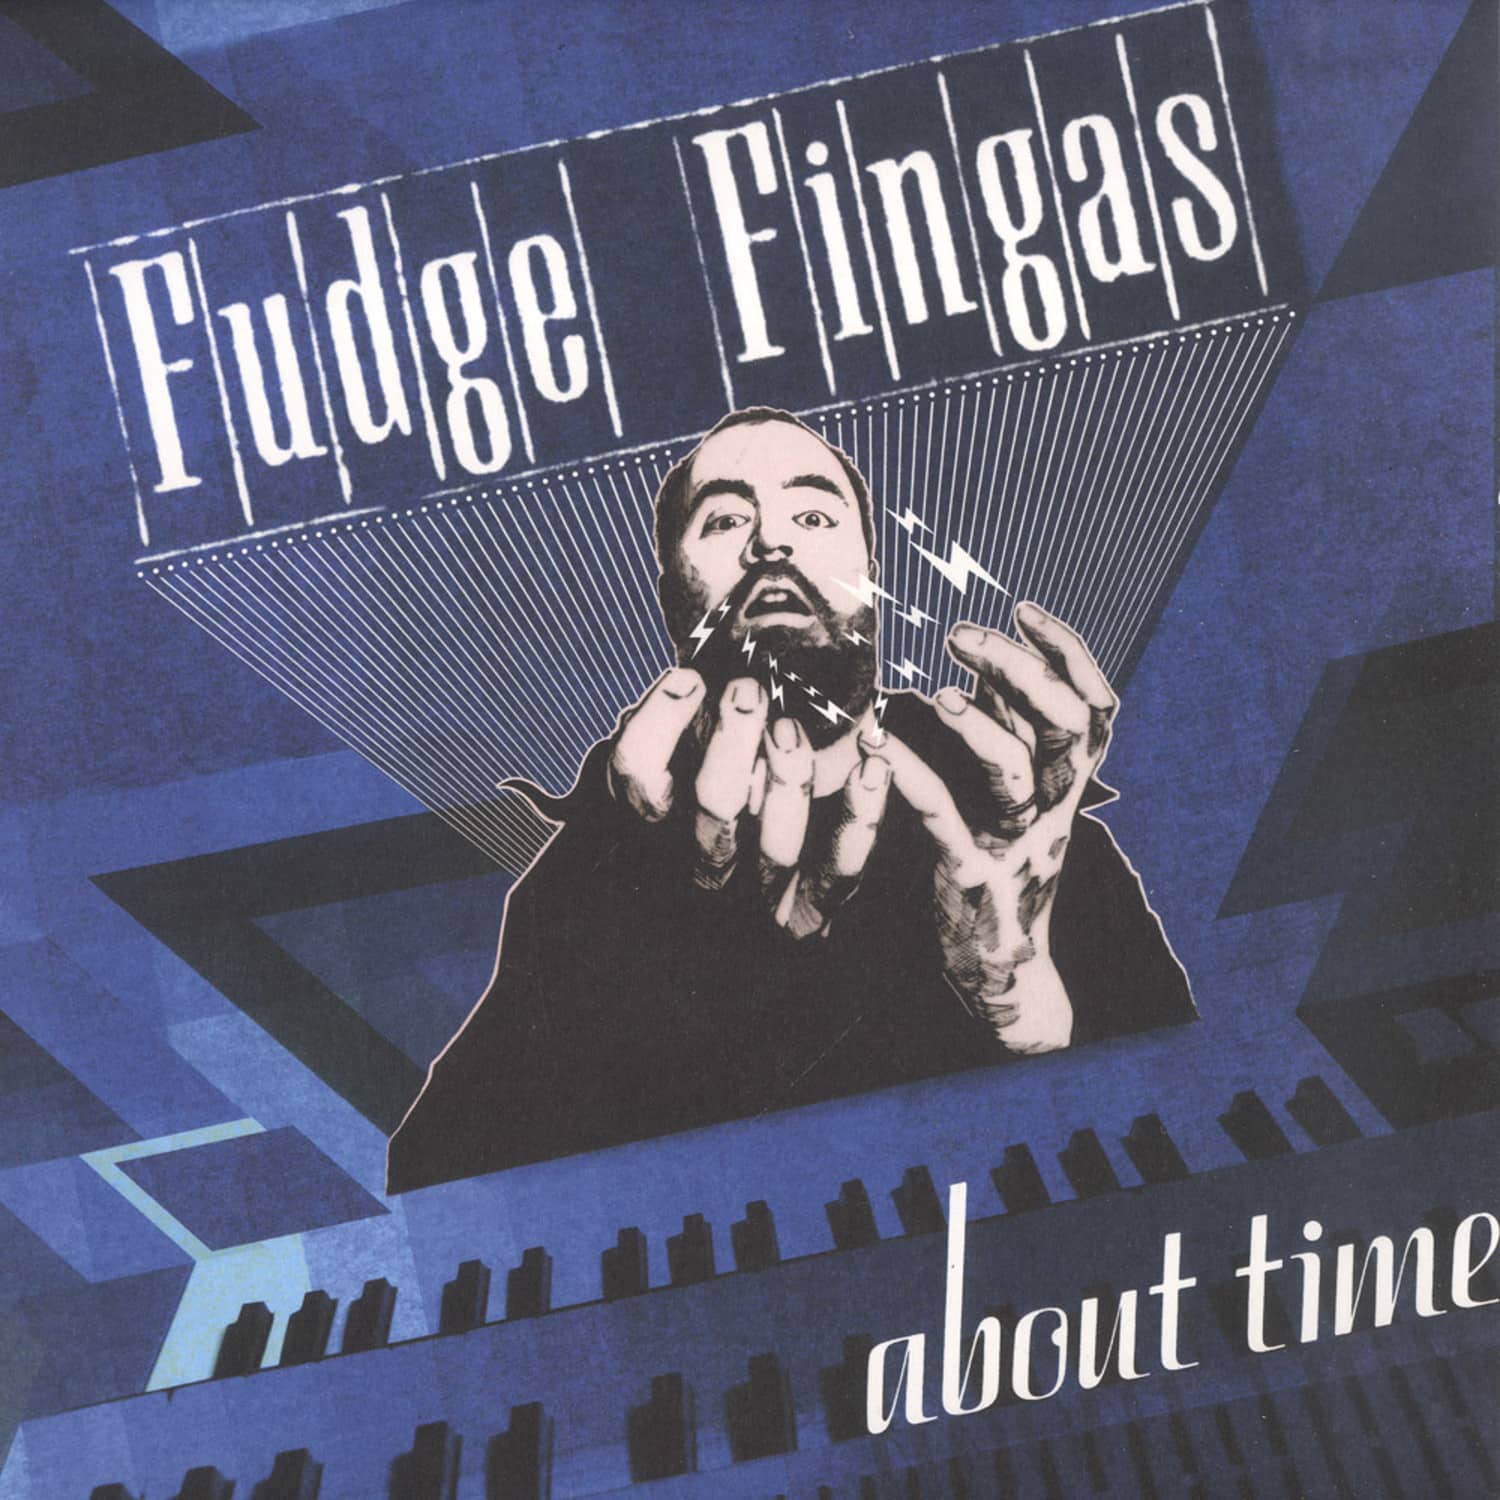 Fudge Fingas - ABOUT TIME EP